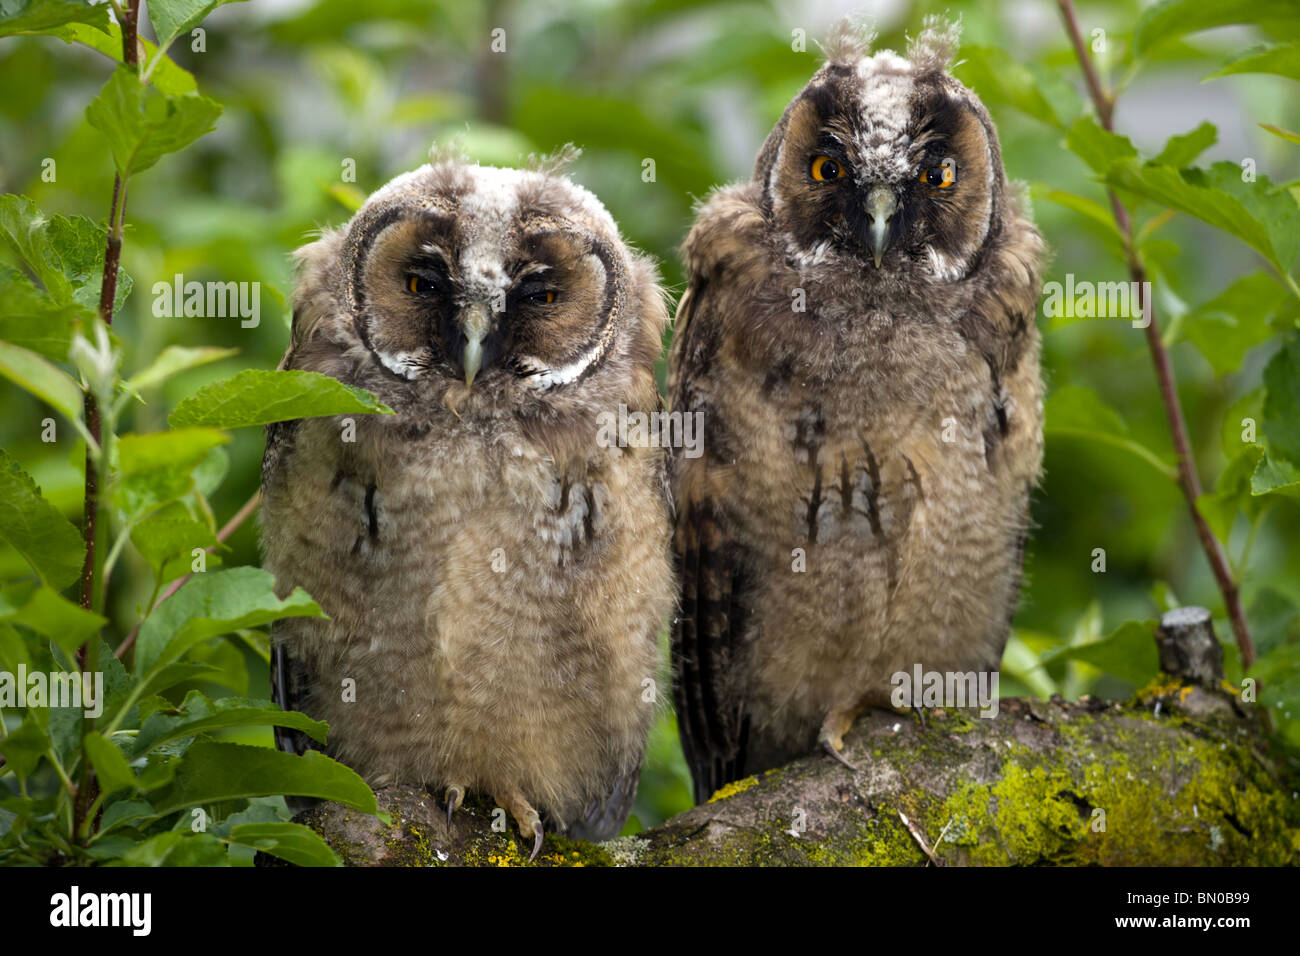 Couple of long-eared owl on the tree branch. Stock Photo